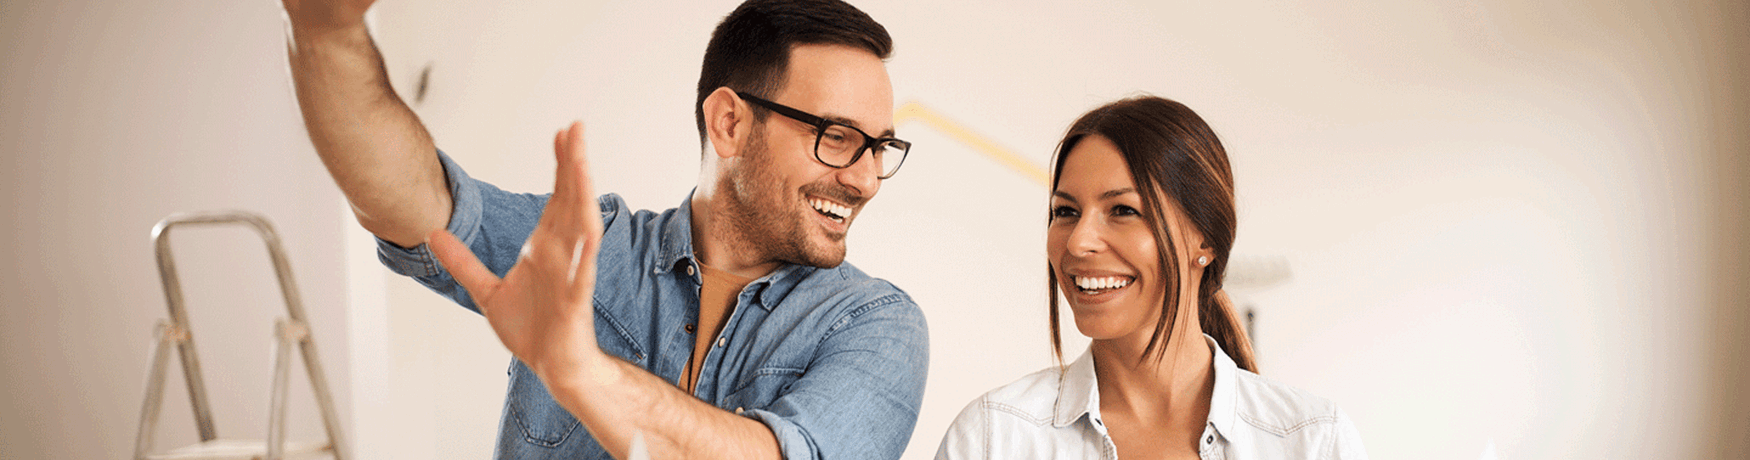 Smiling couple in a house that needs renovating discussing plans